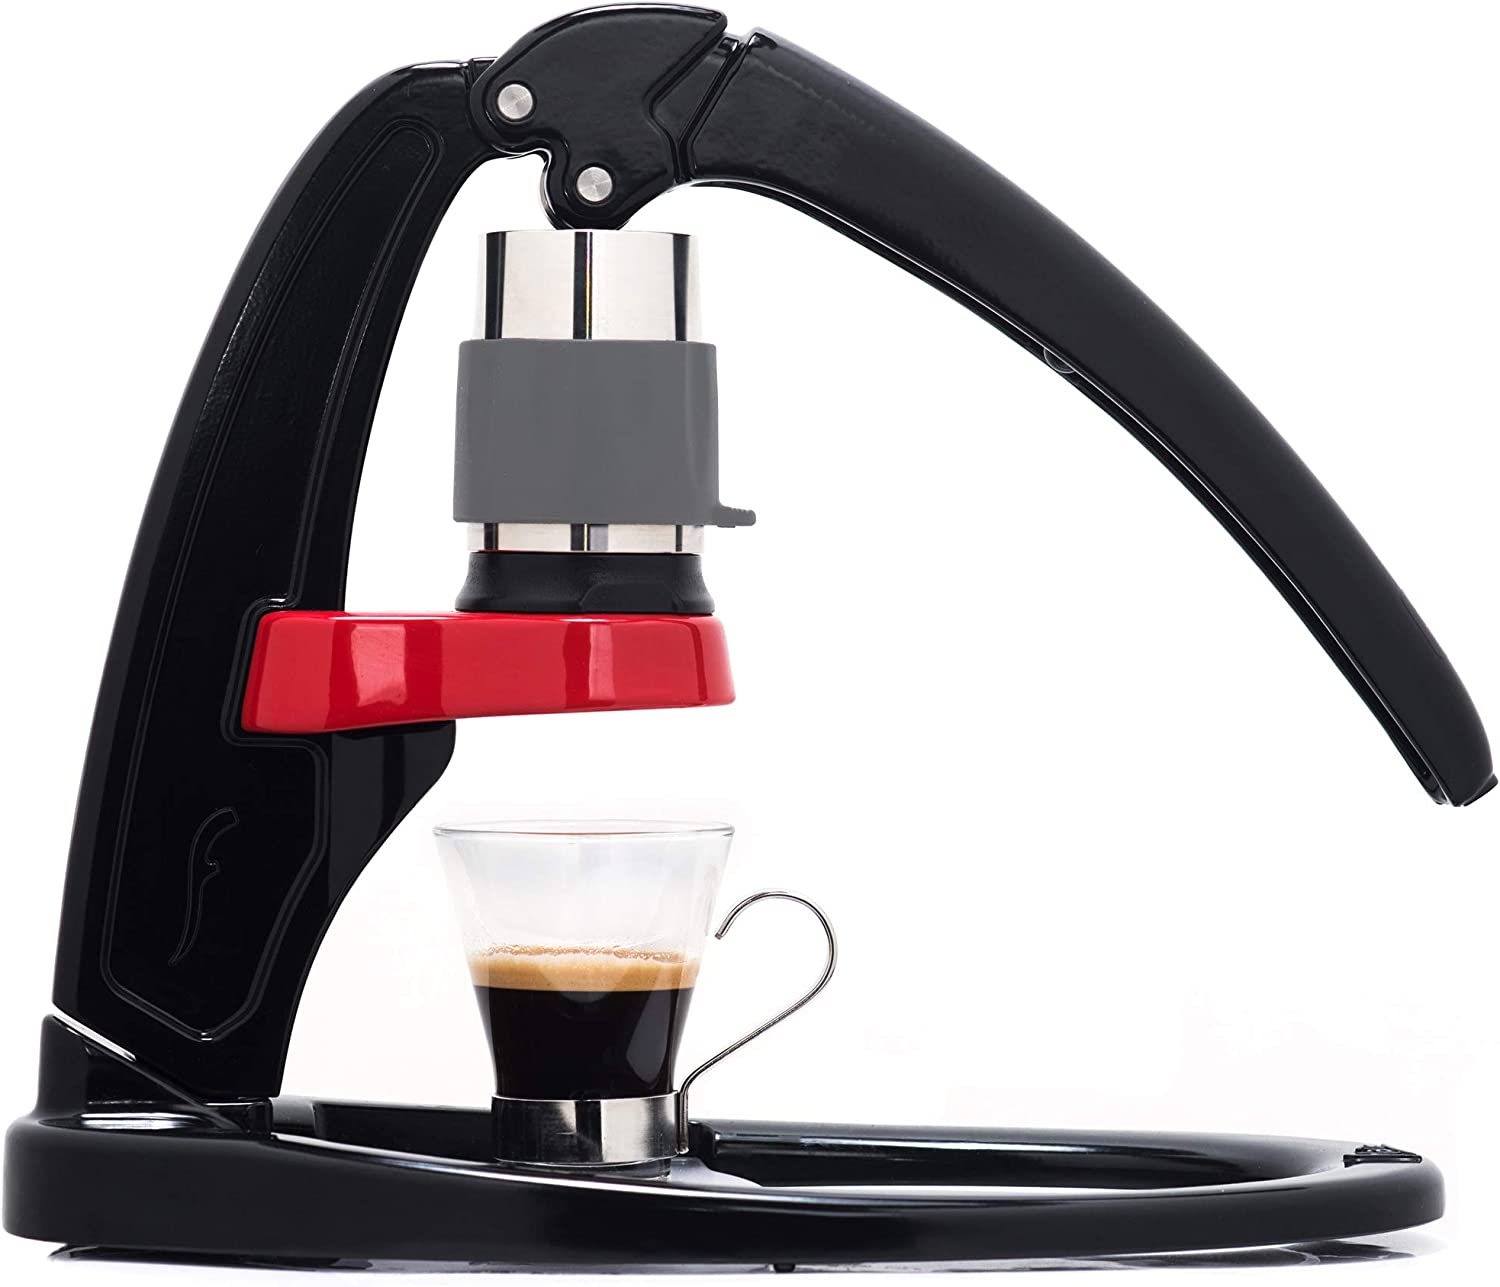 We tested the top 5 espresso machines